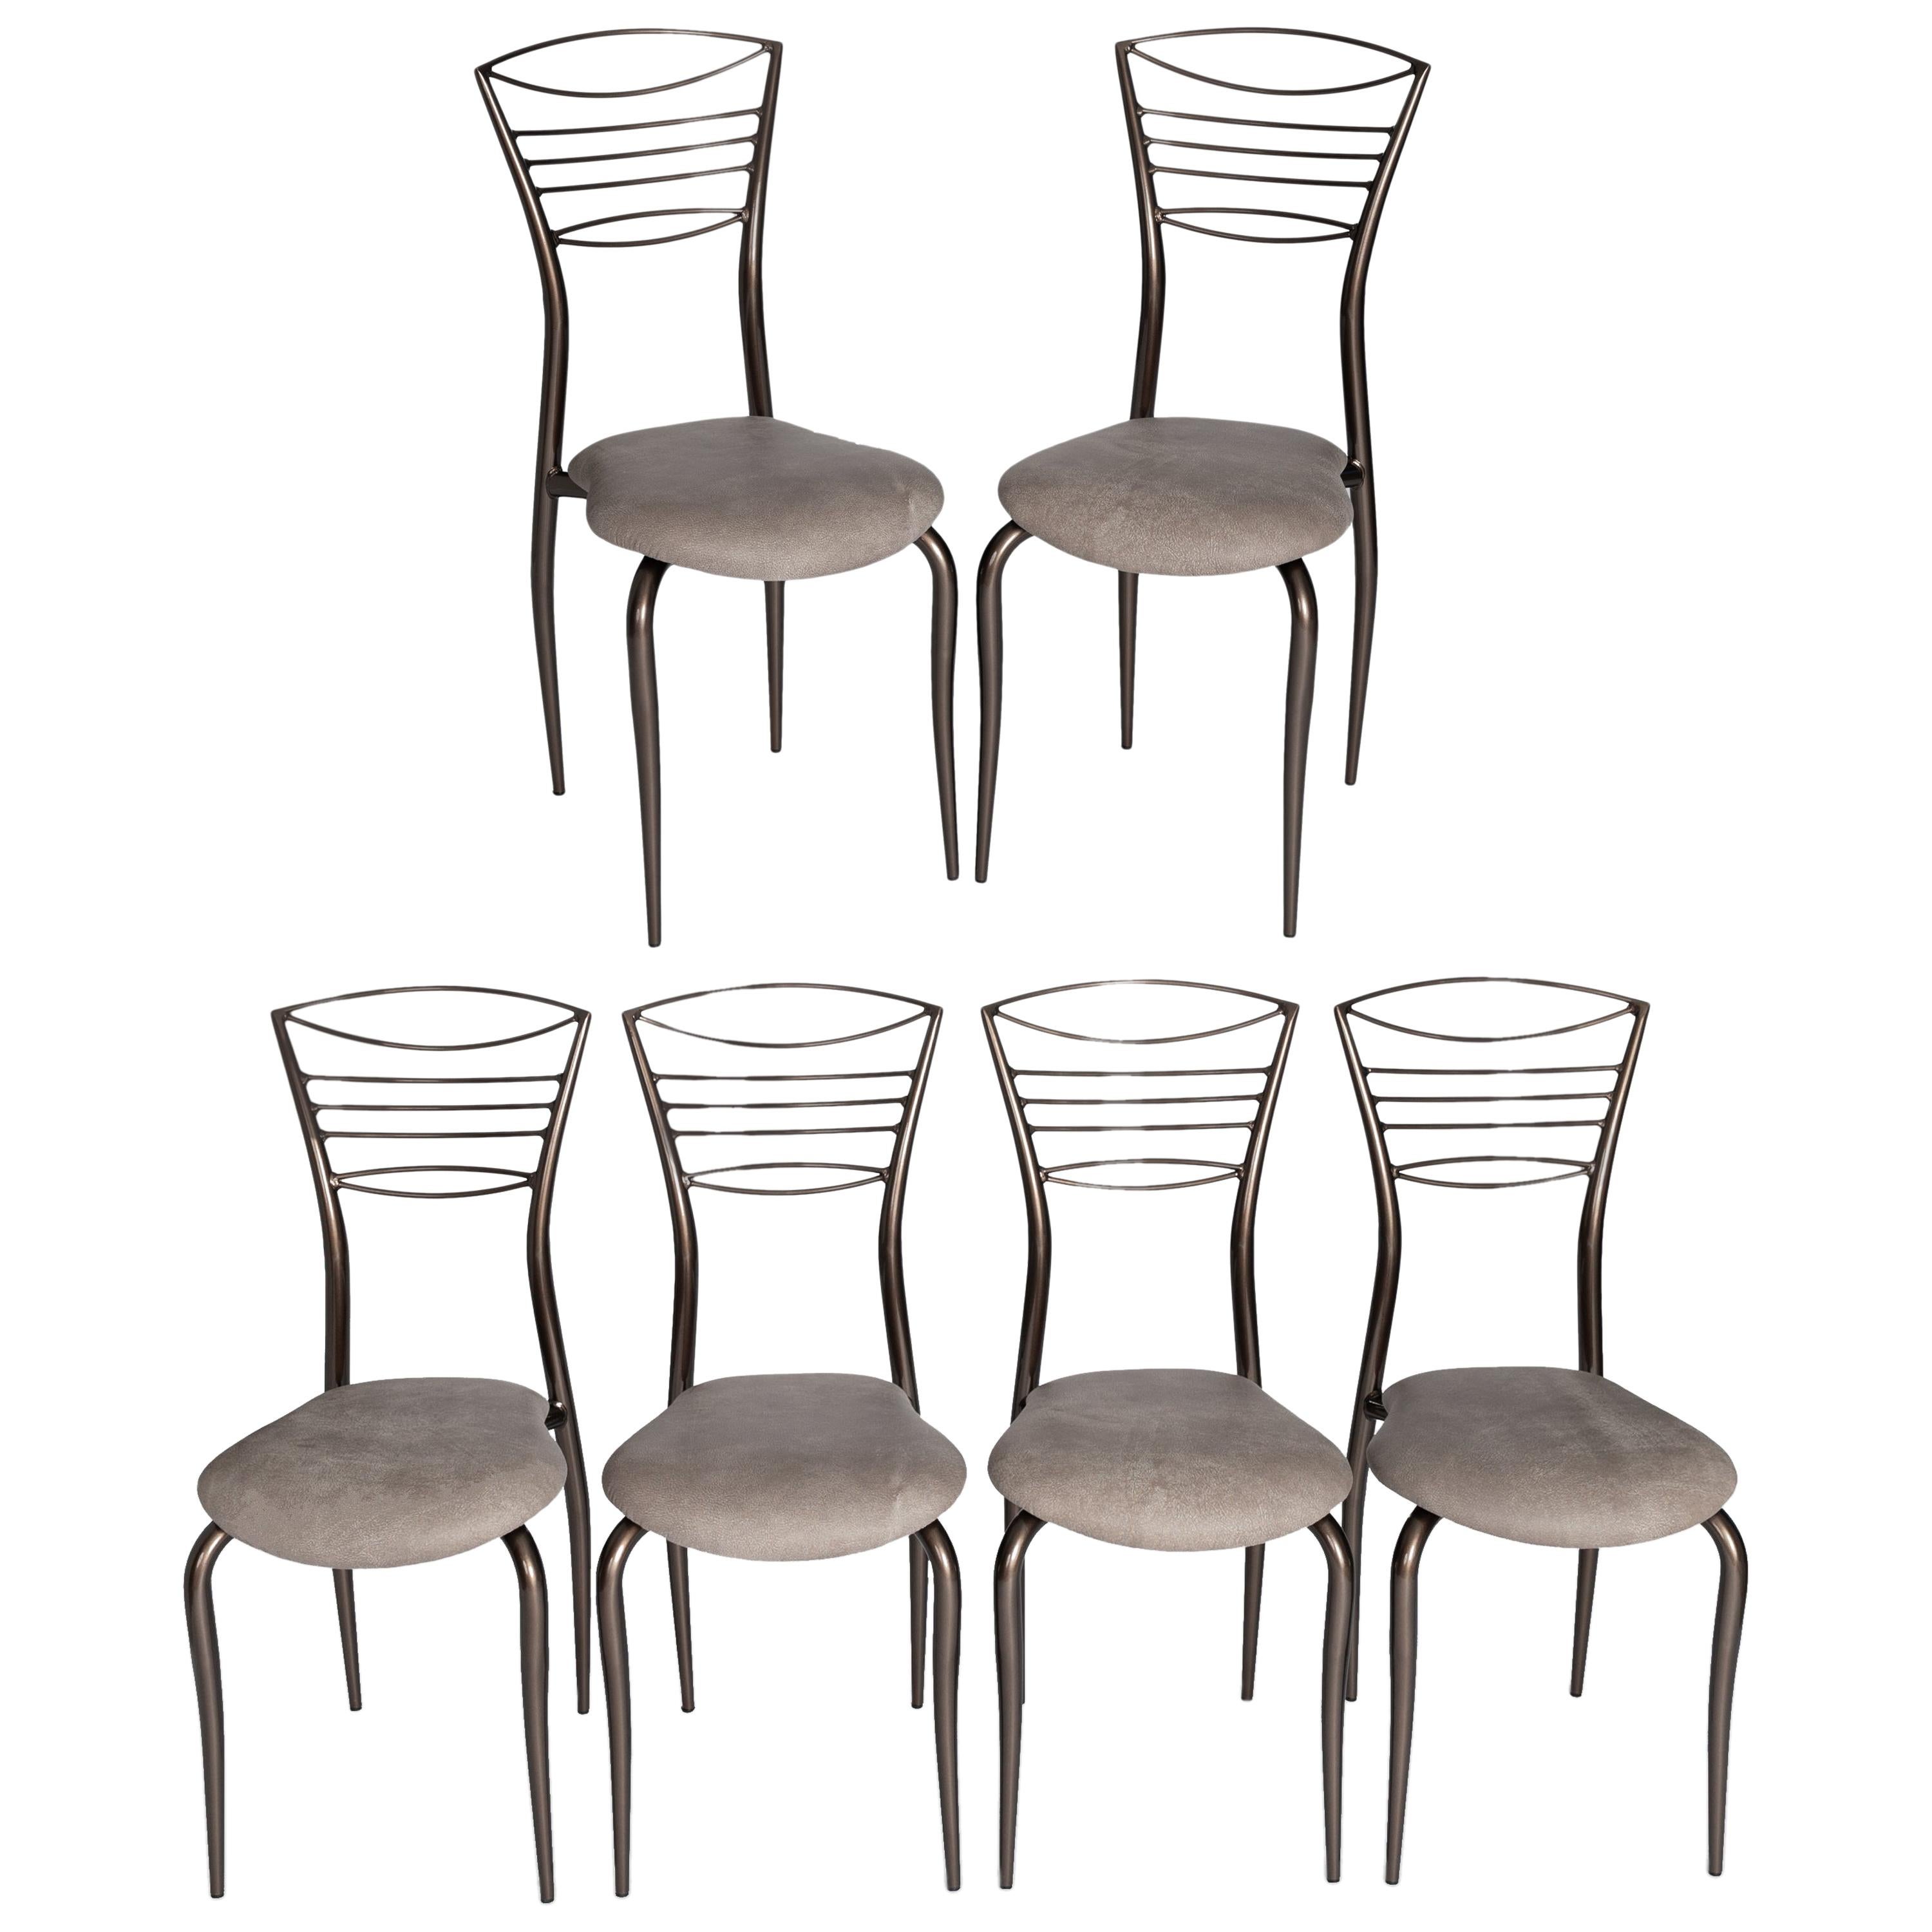 6 delicate and light-footed midcentury designed chairs.
Cast iron in shiny metallic brown-taupe-colored paint, taupe-colored leather in a matt vintage look.
The lines show soft curves on the leg design as well as the seat cushion and the